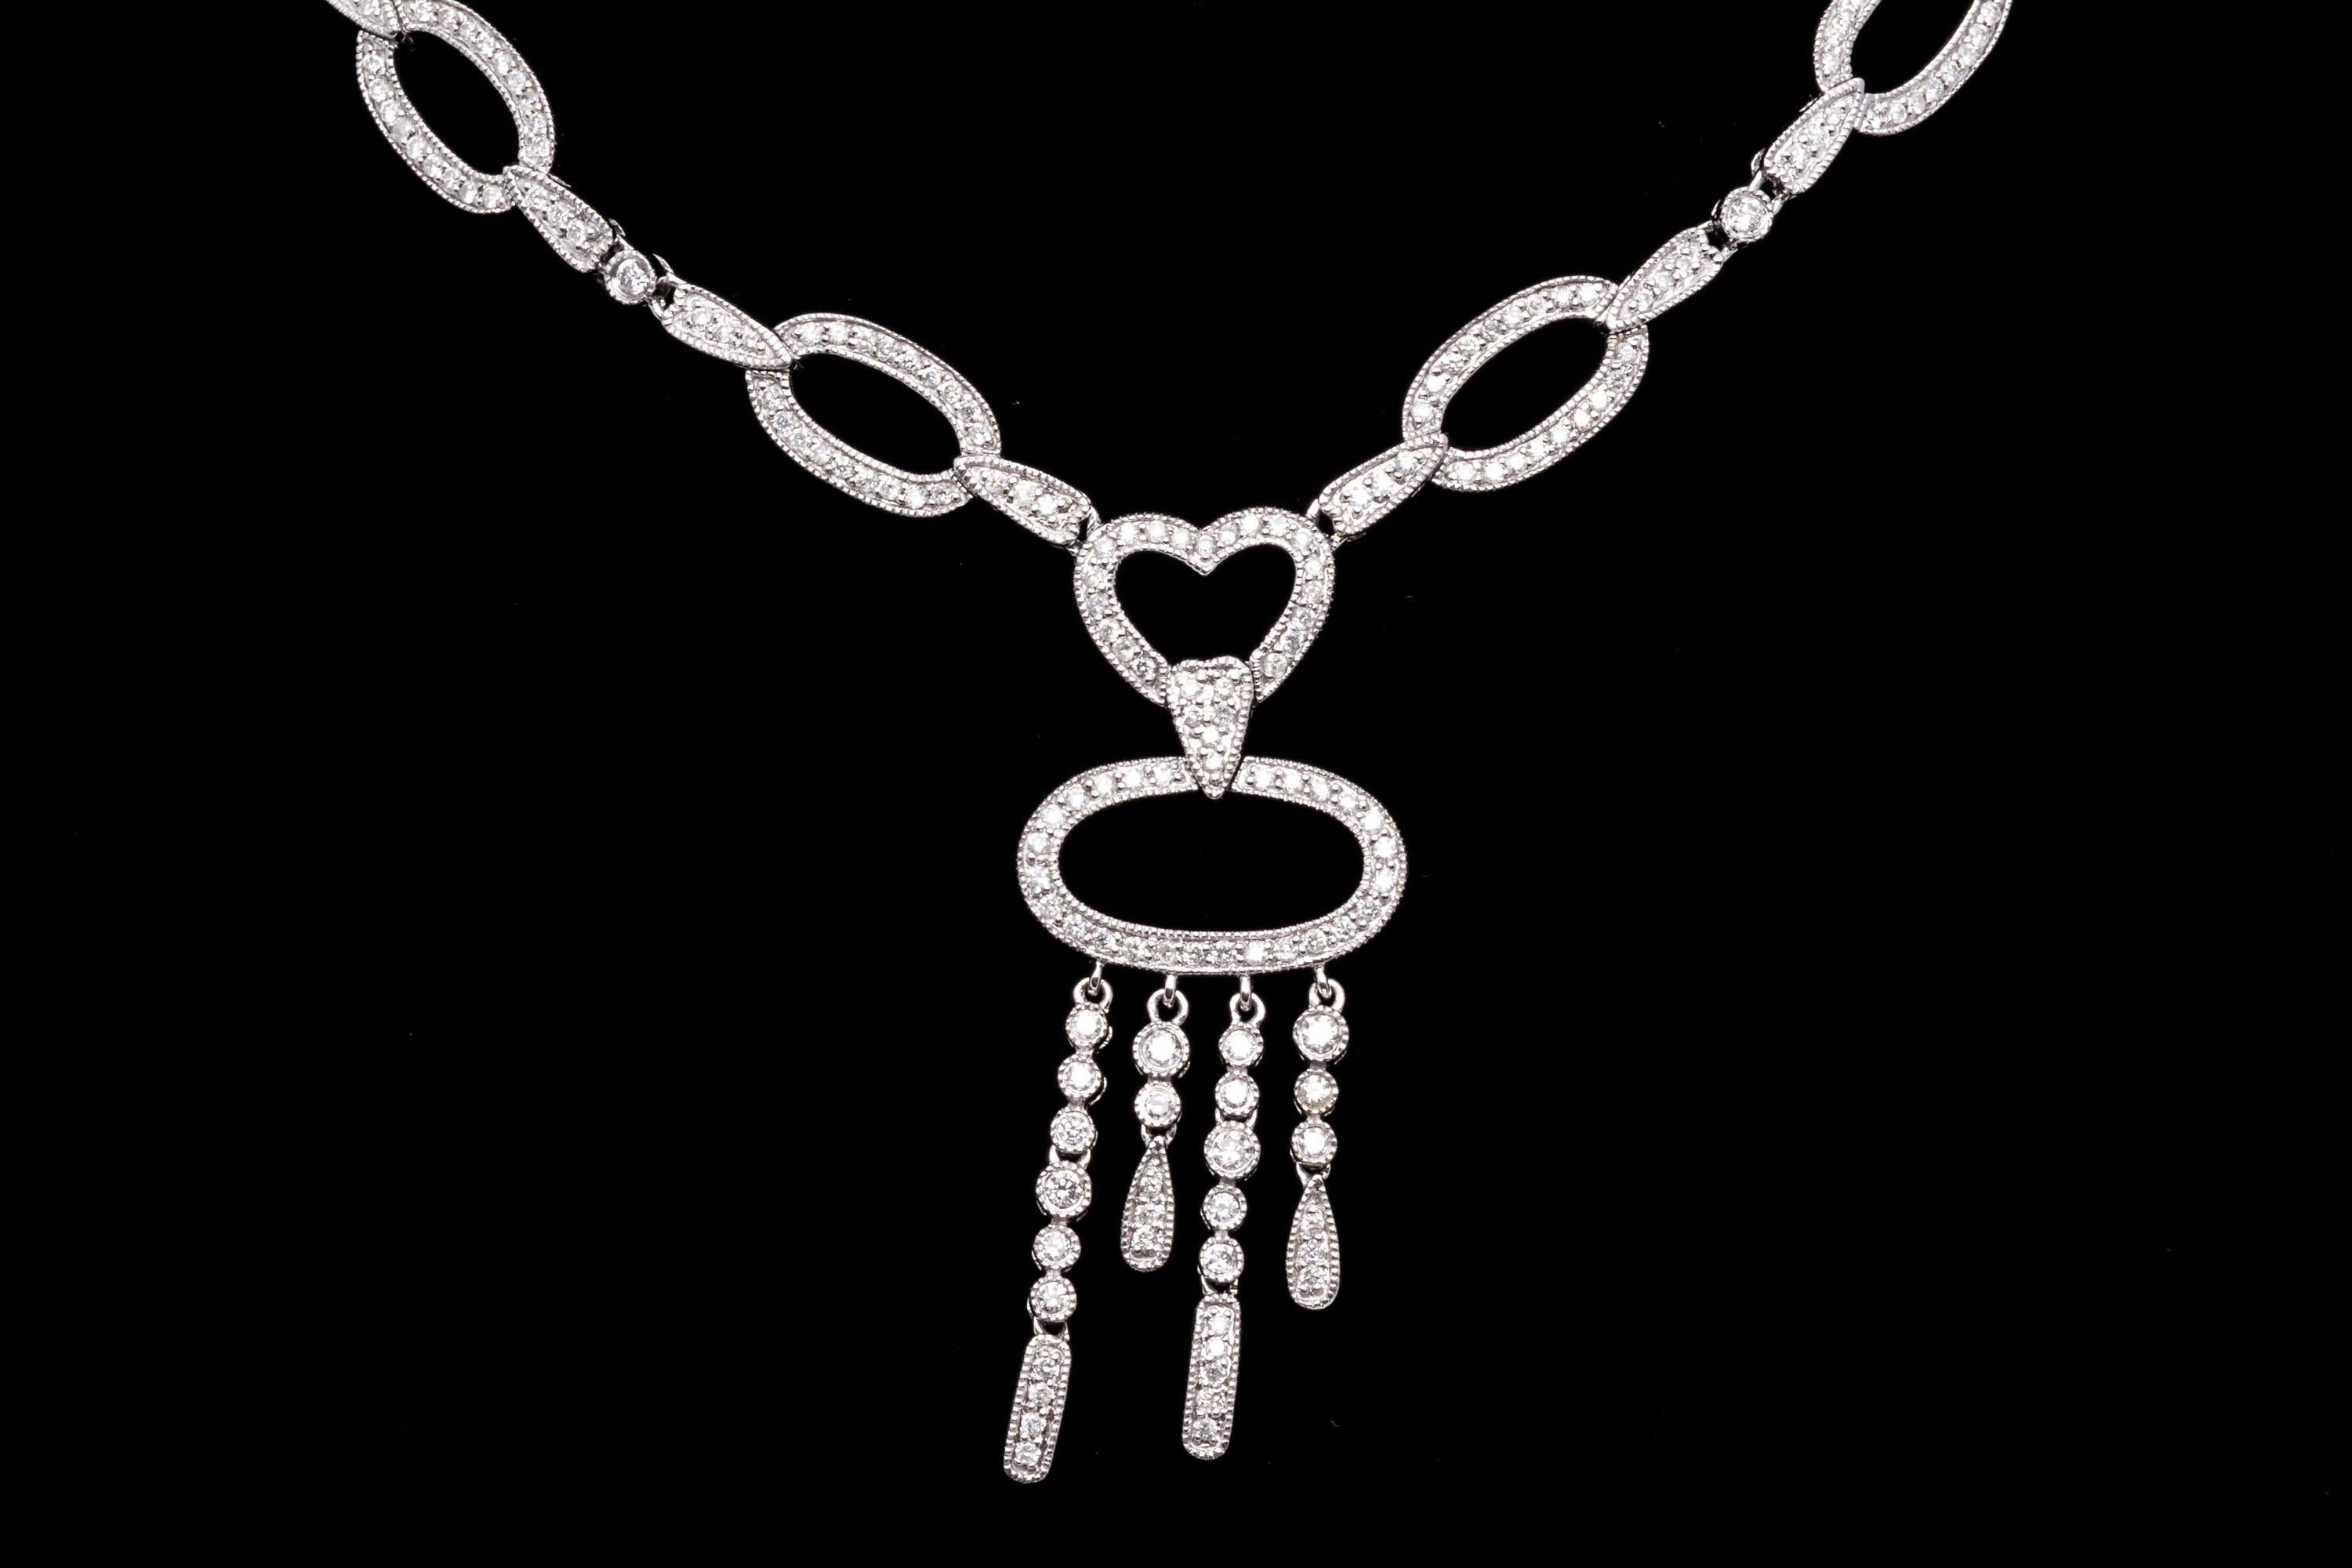 14k white gold necklace. This impressive necklace is a high polished white gold, articulated link that centers to open, round faceted diamond set horizontal oval links that lead to a heart center, diamond set, and a horizontal oval drop and fringe